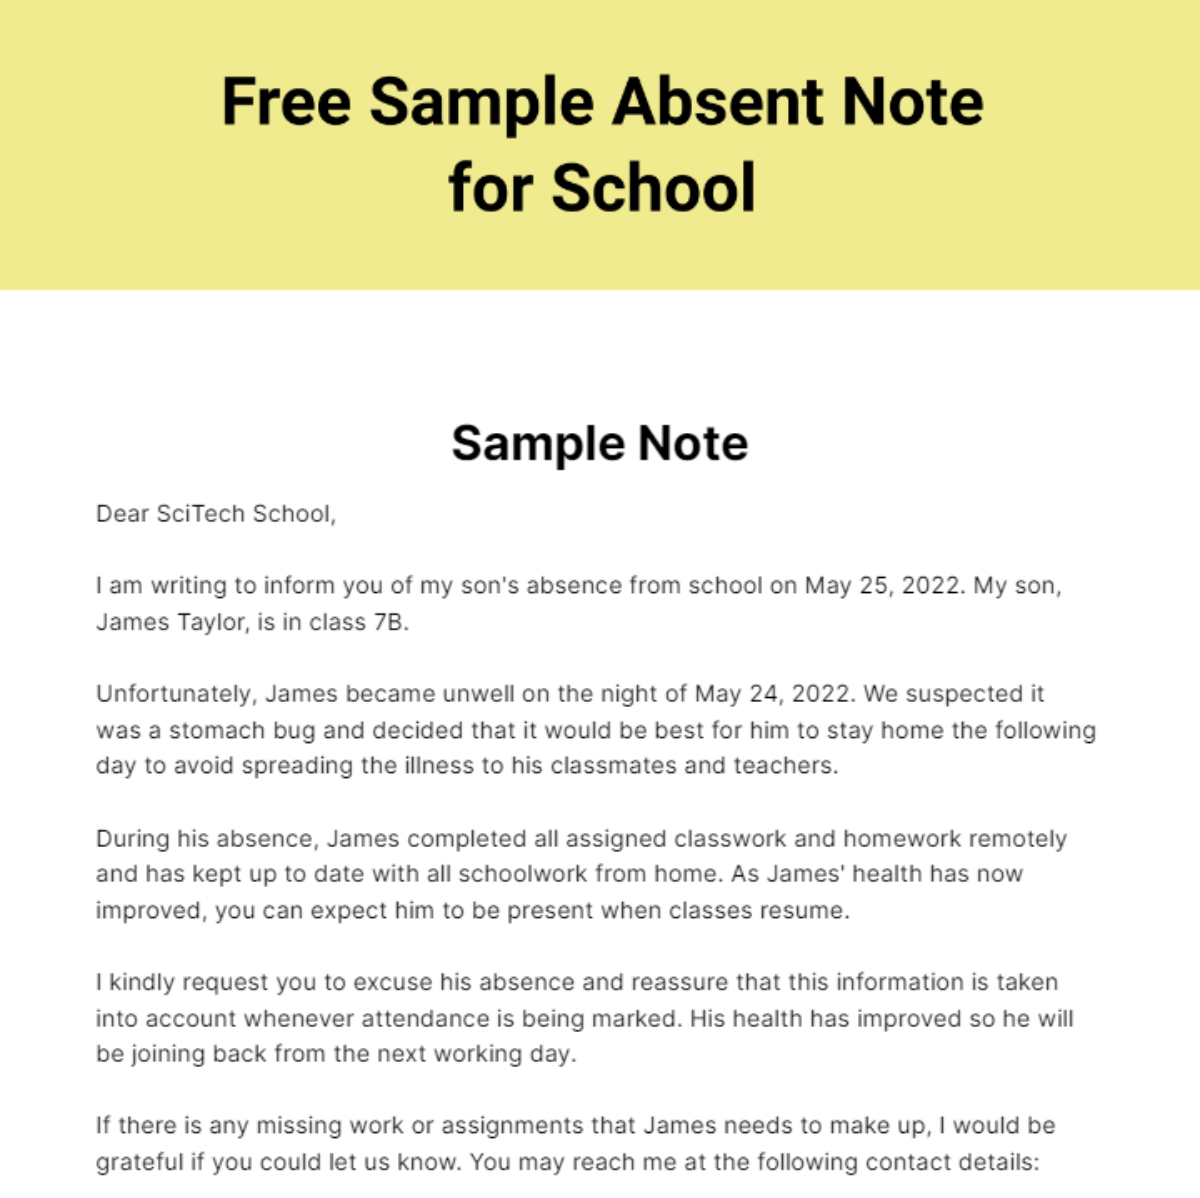 Free Sample Absent Note for School Template